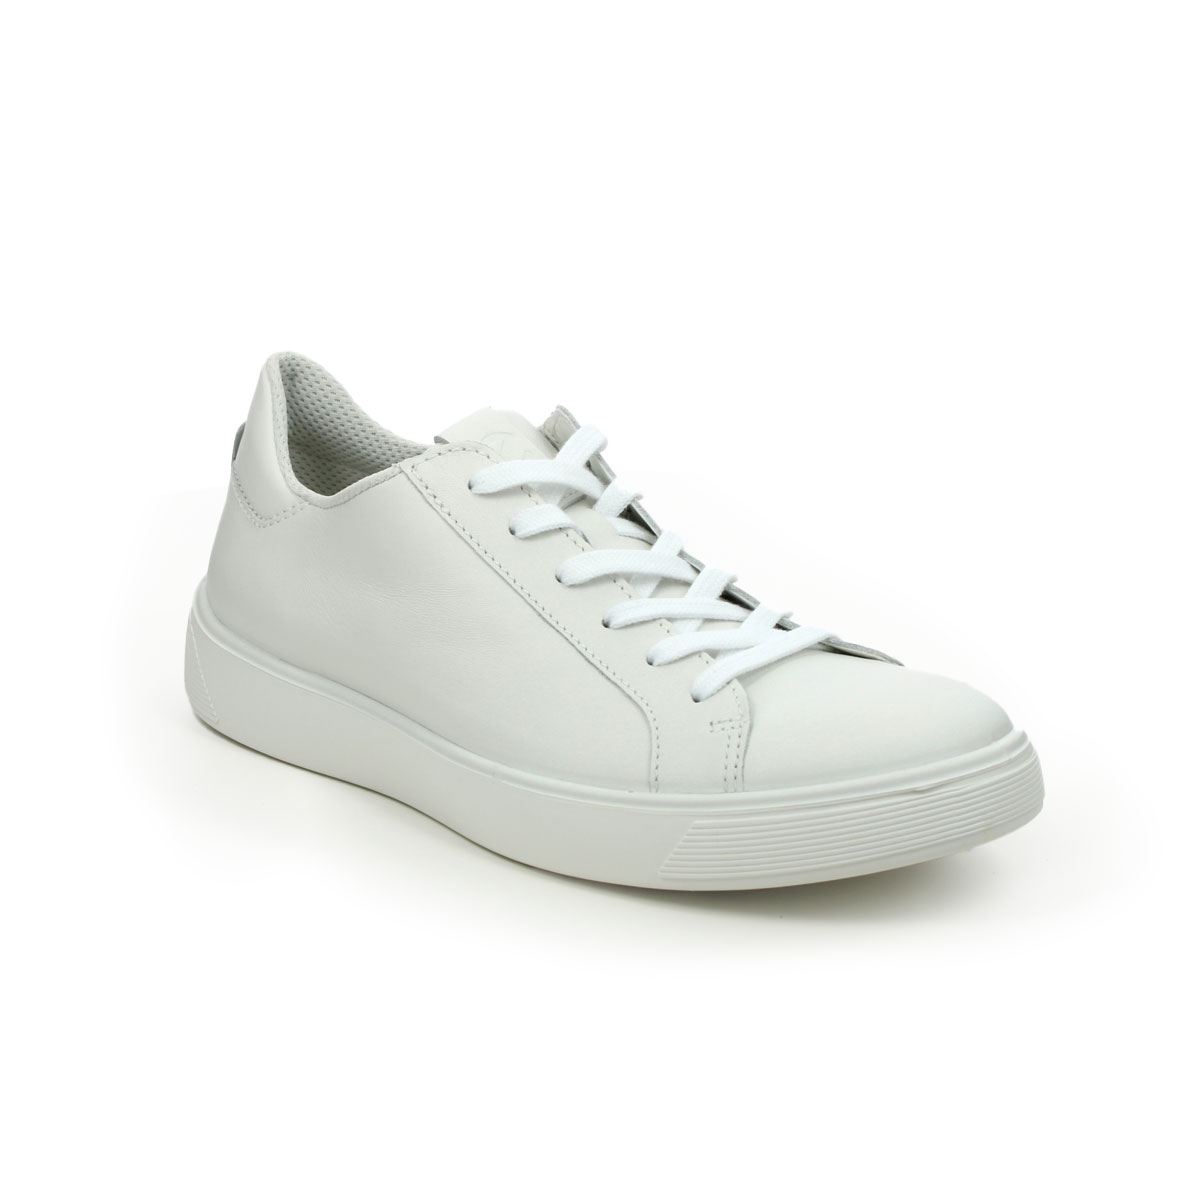 Ecco Street Tray Mens White Leather Mens Trainers 504744-01007 In Size 42 In Plain White Leather